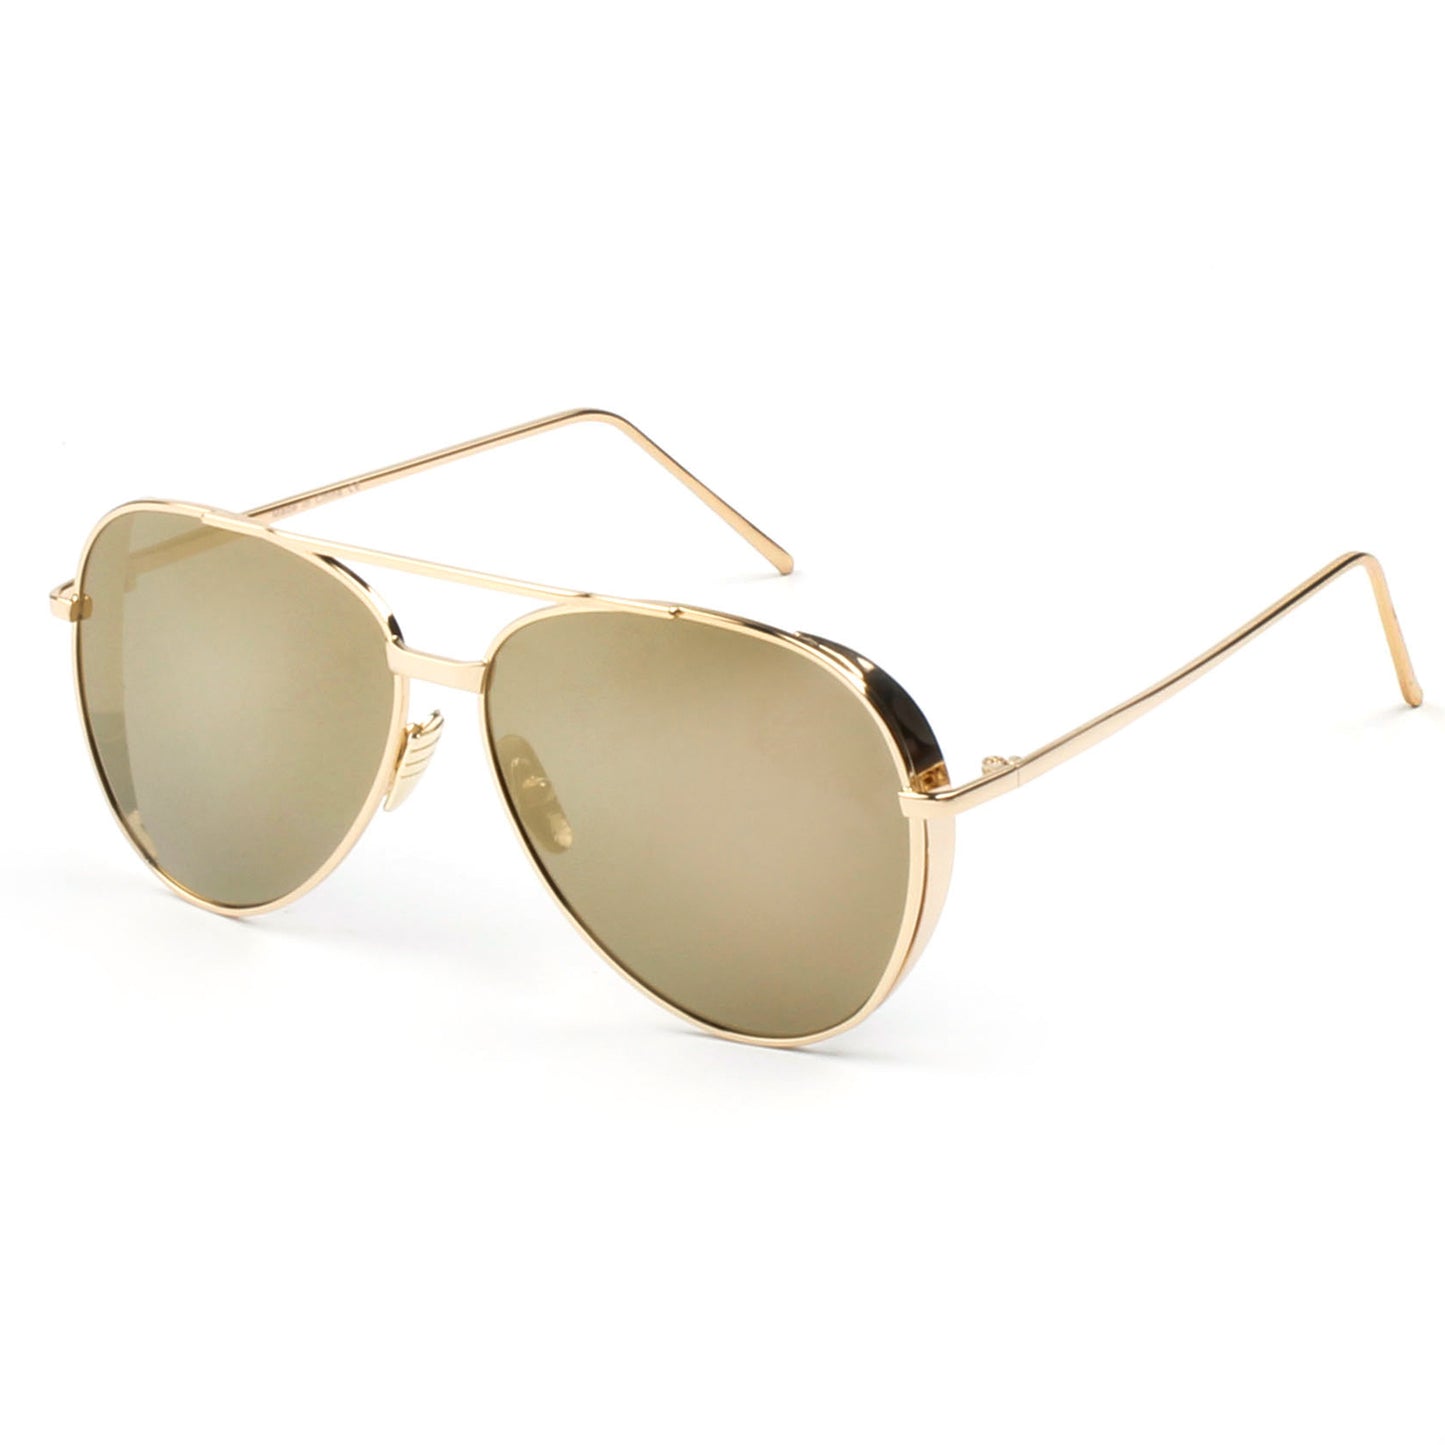 RECIFE SUNGLASS IN GOLD WITH BROWN LENSES